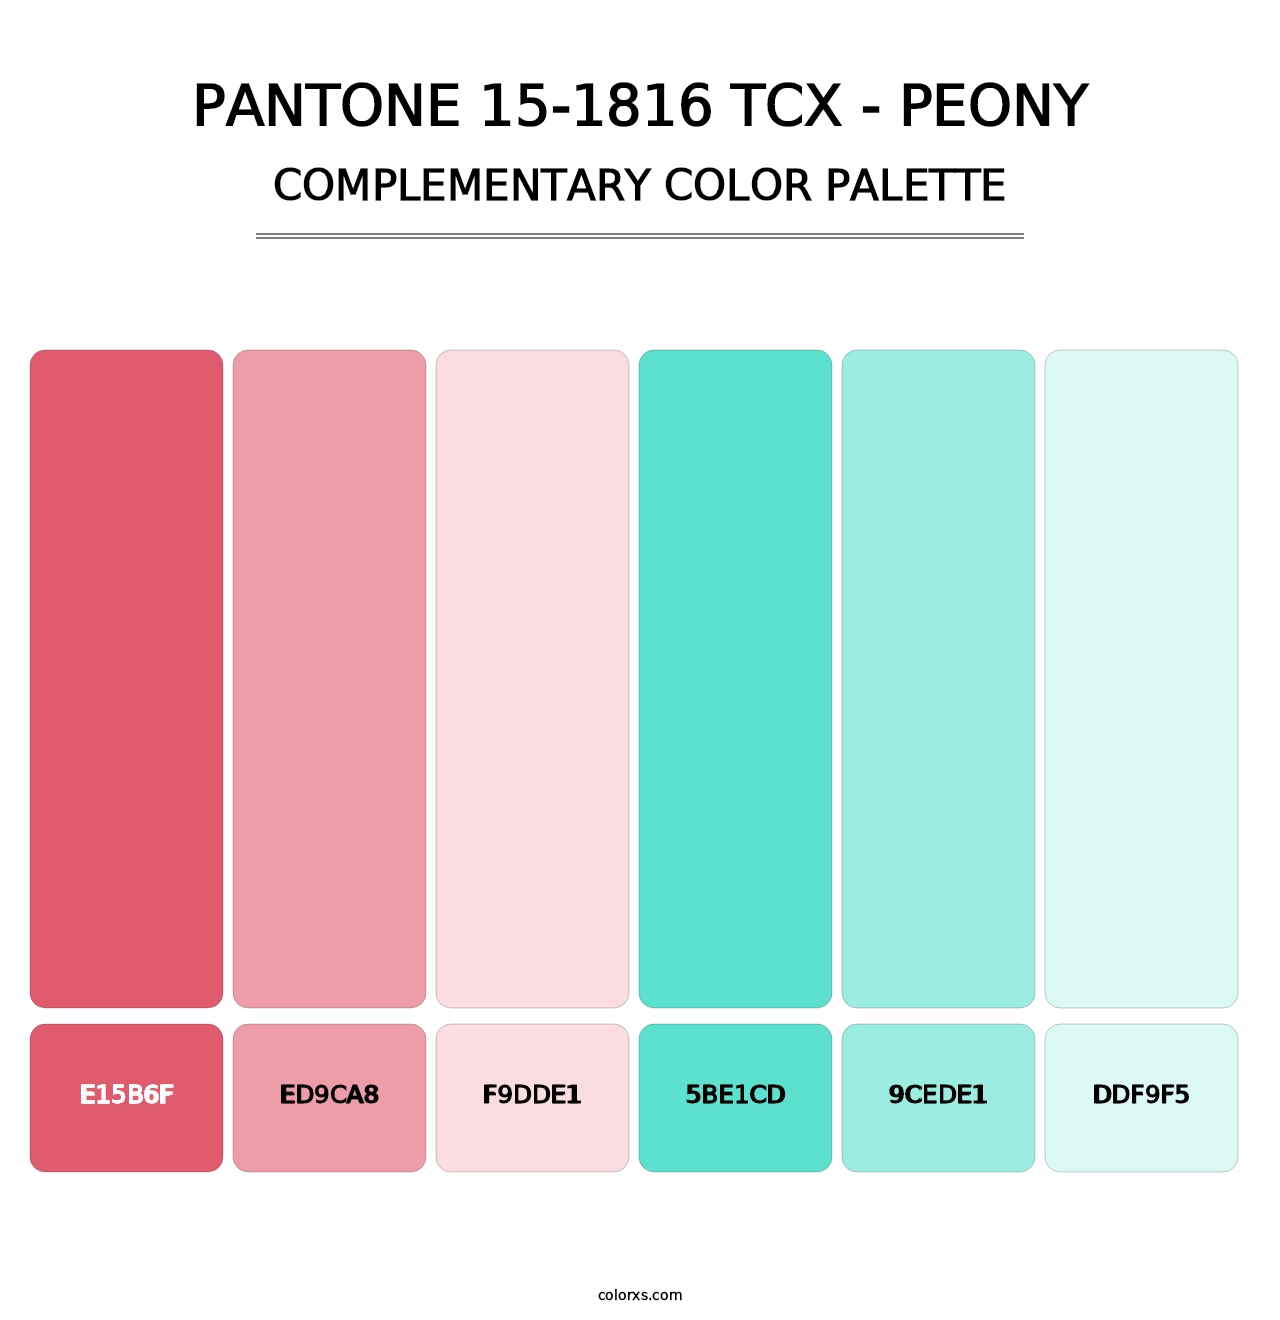 PANTONE 15-1816 TCX - Peony - Complementary Color Palette